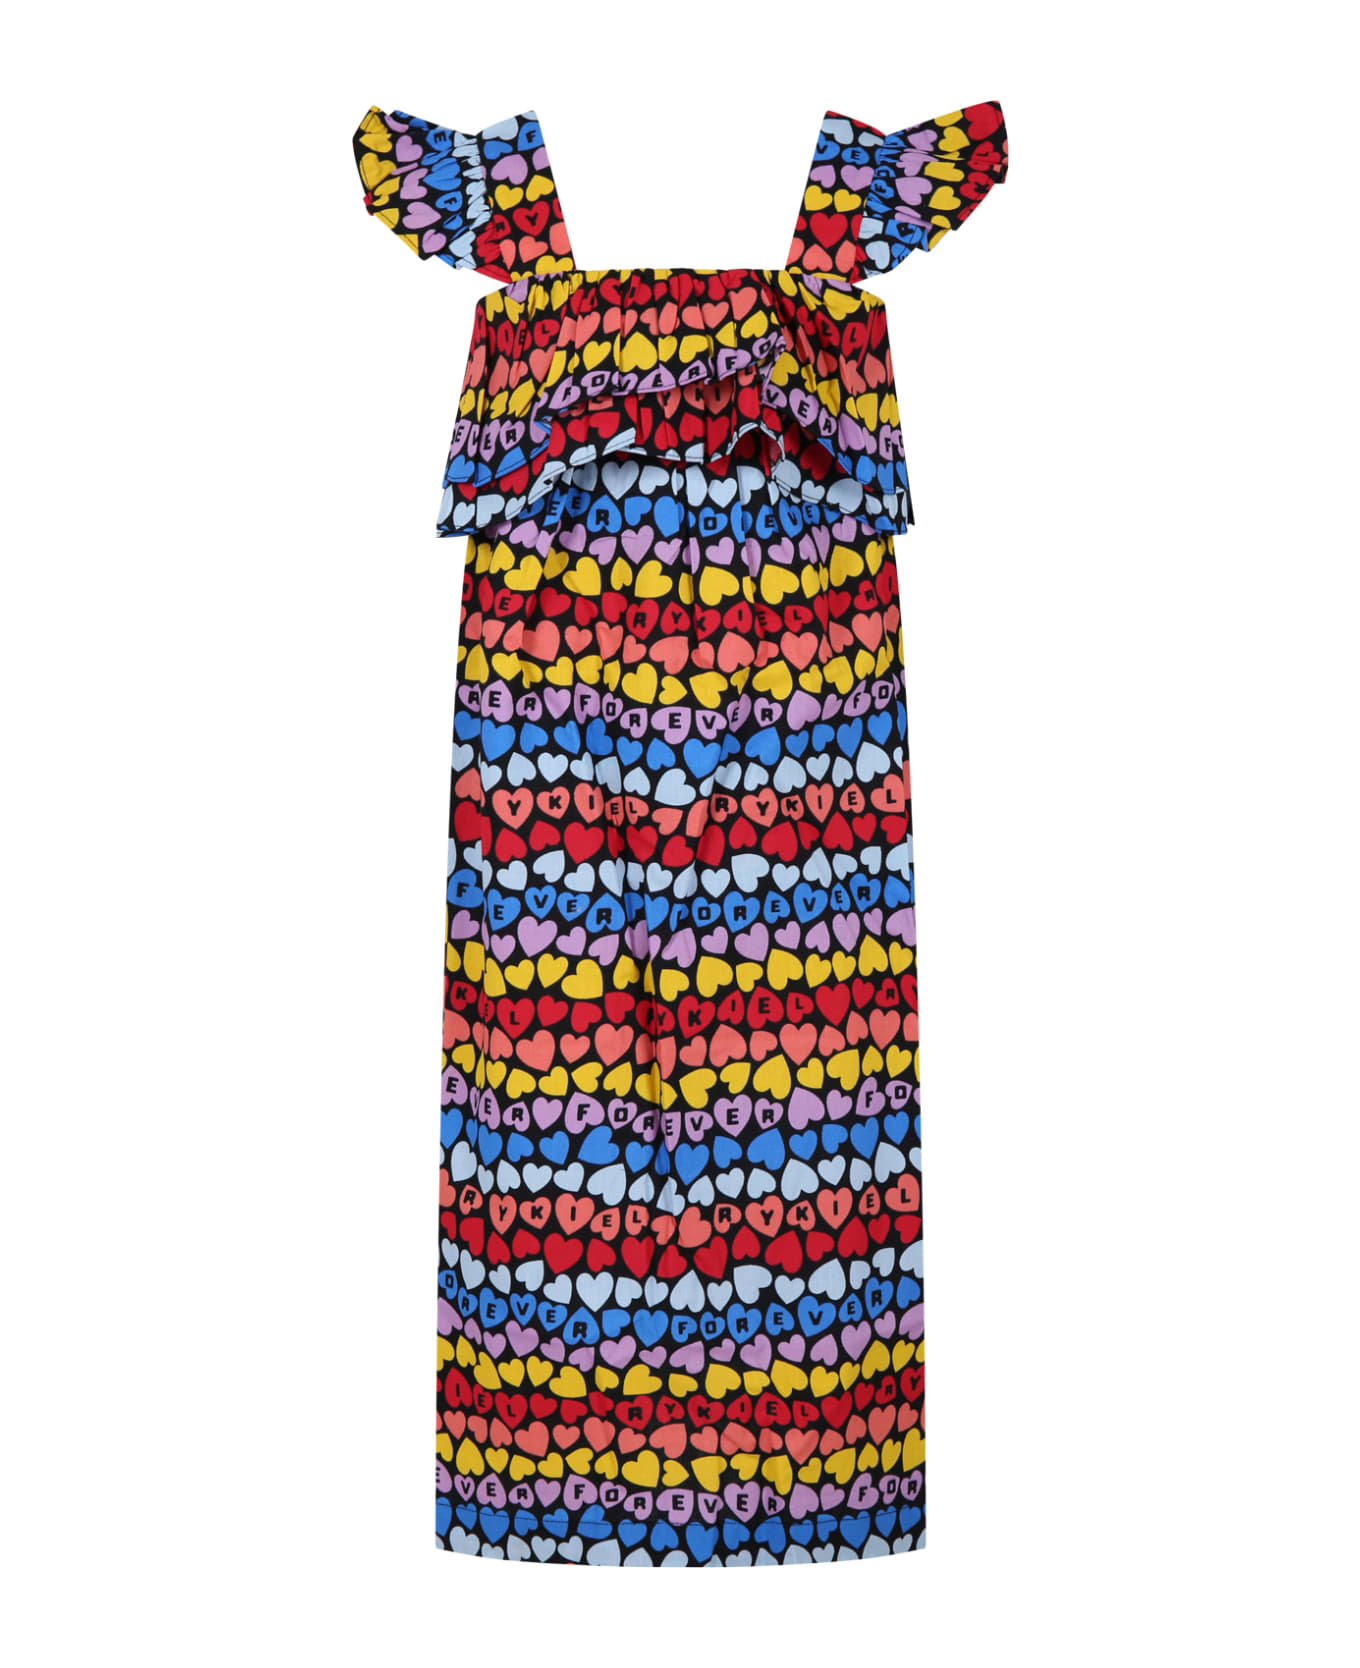 Rykiel Enfant Multicolor Dress For Girl With All-over Hearts - Multicolor